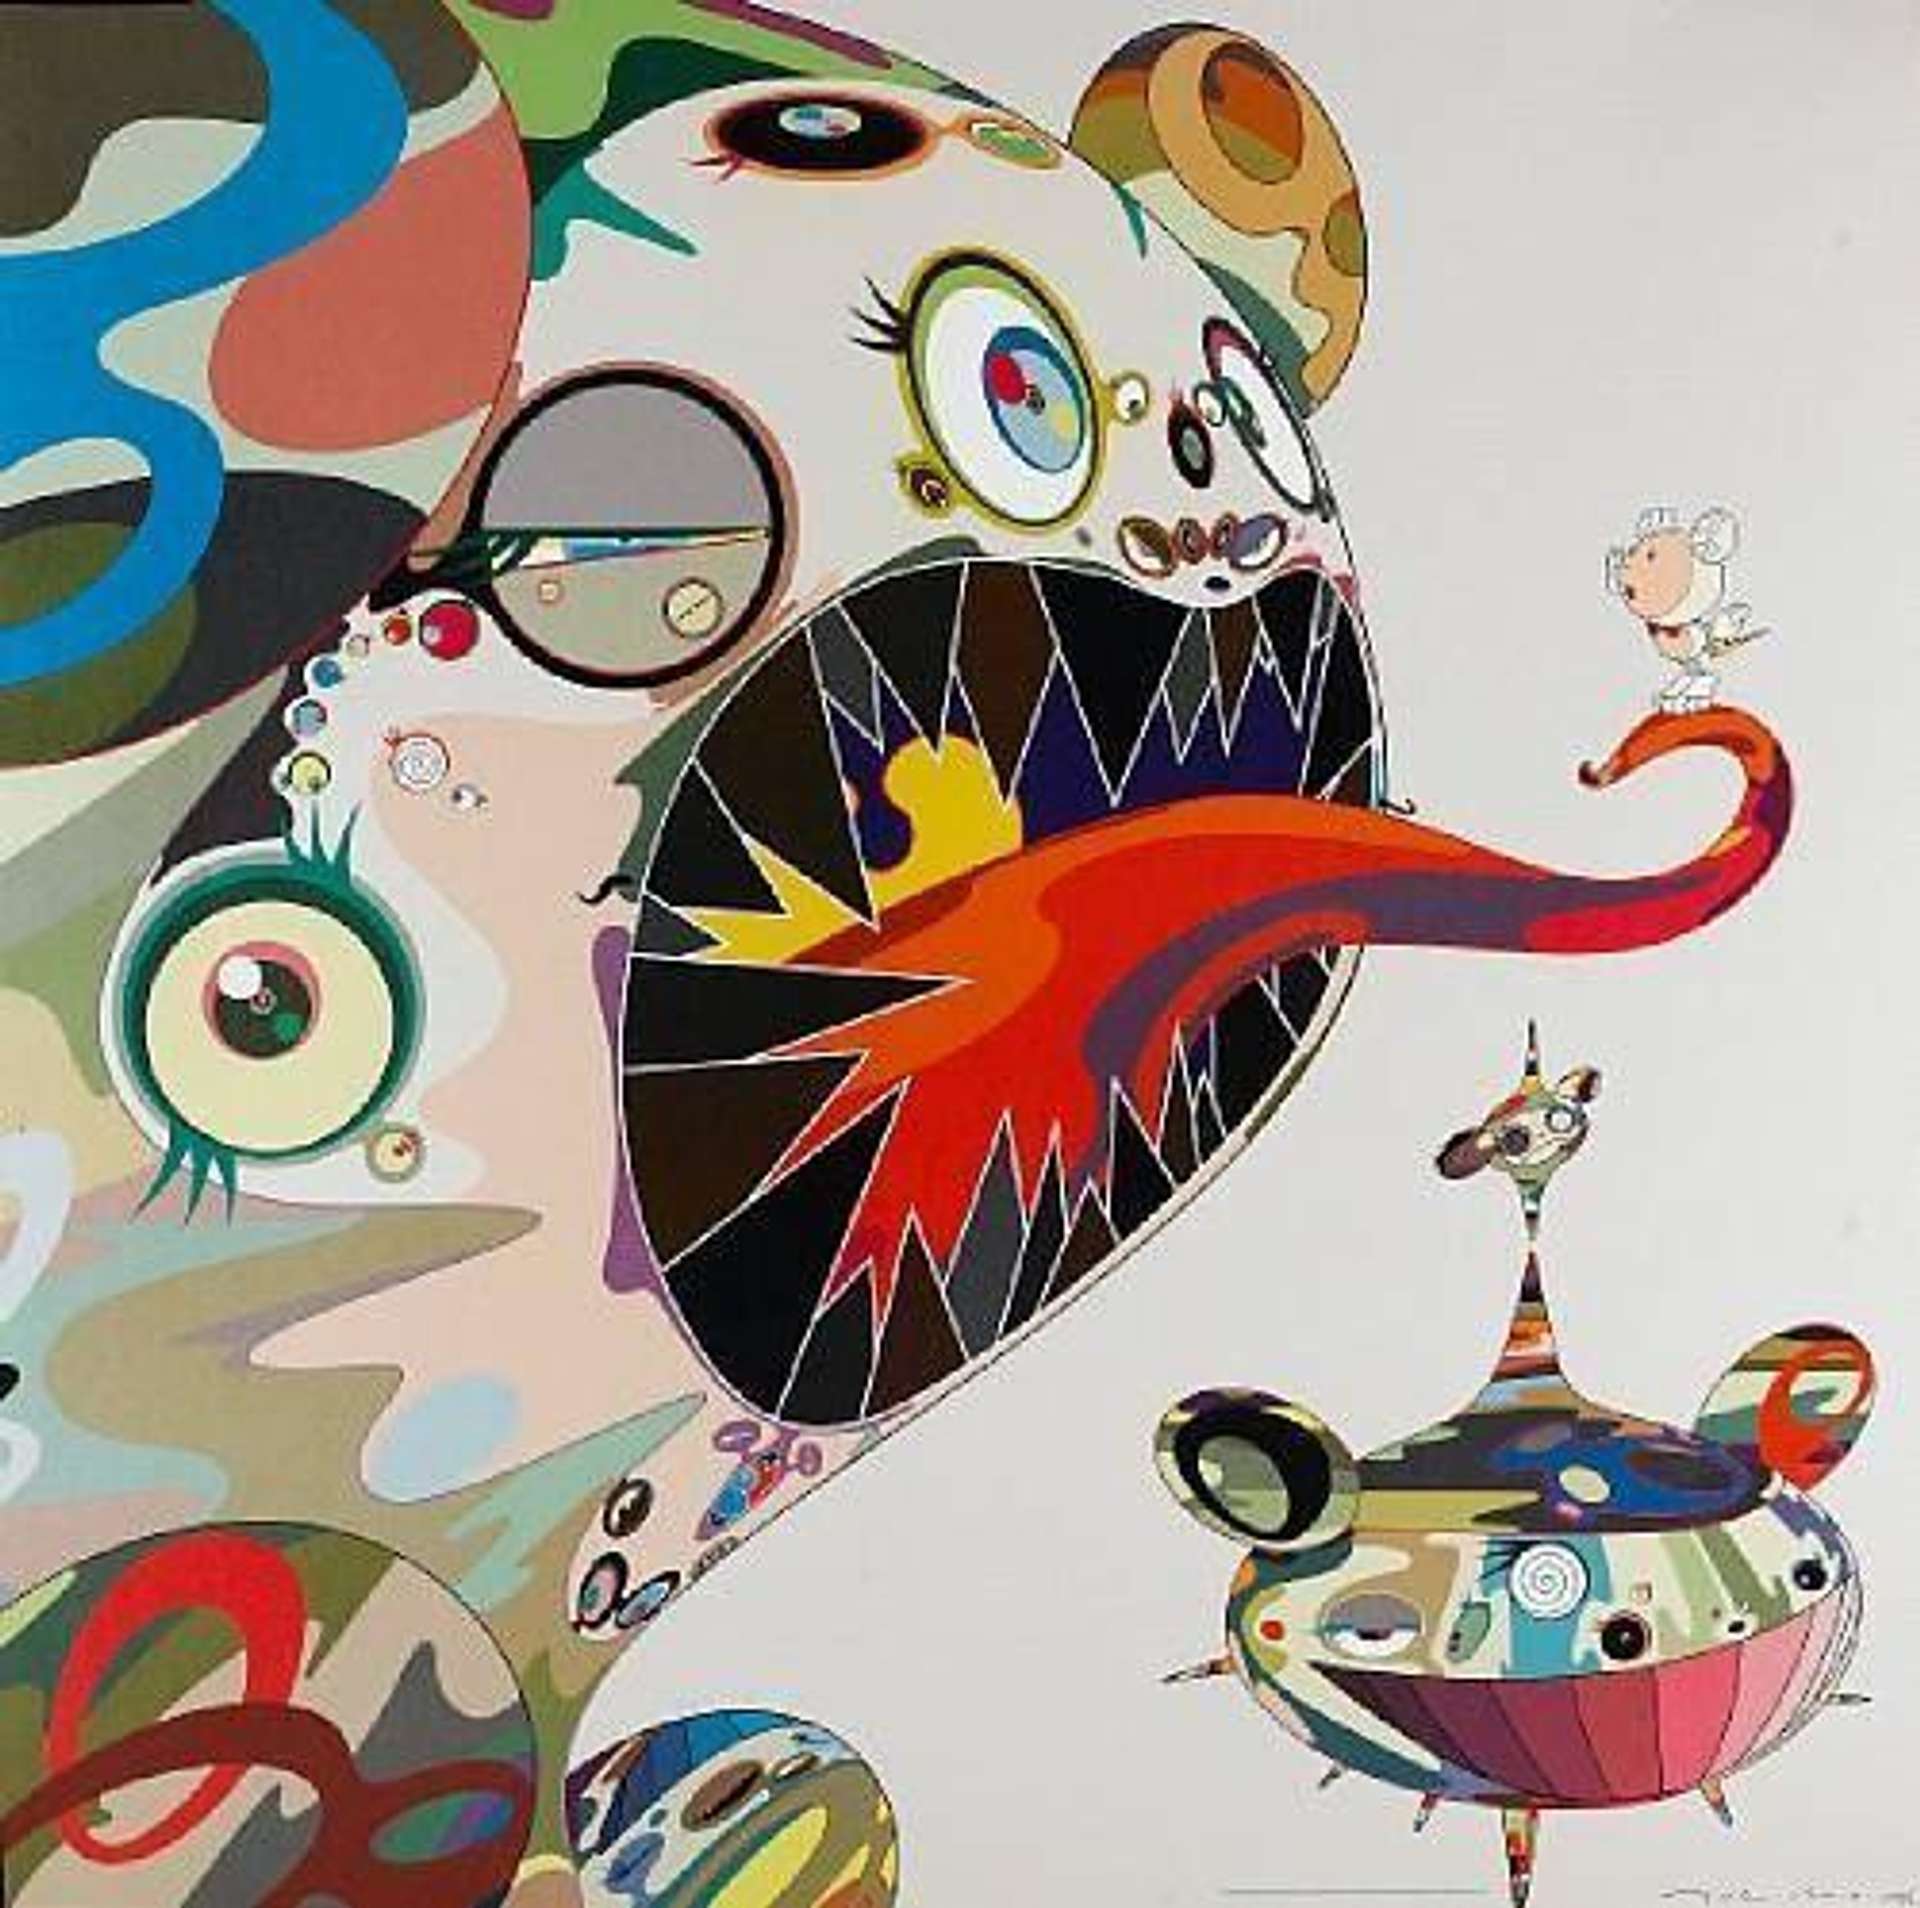 An Homage To Francis Bacon: Study For George Dyer by Takashi Murakami